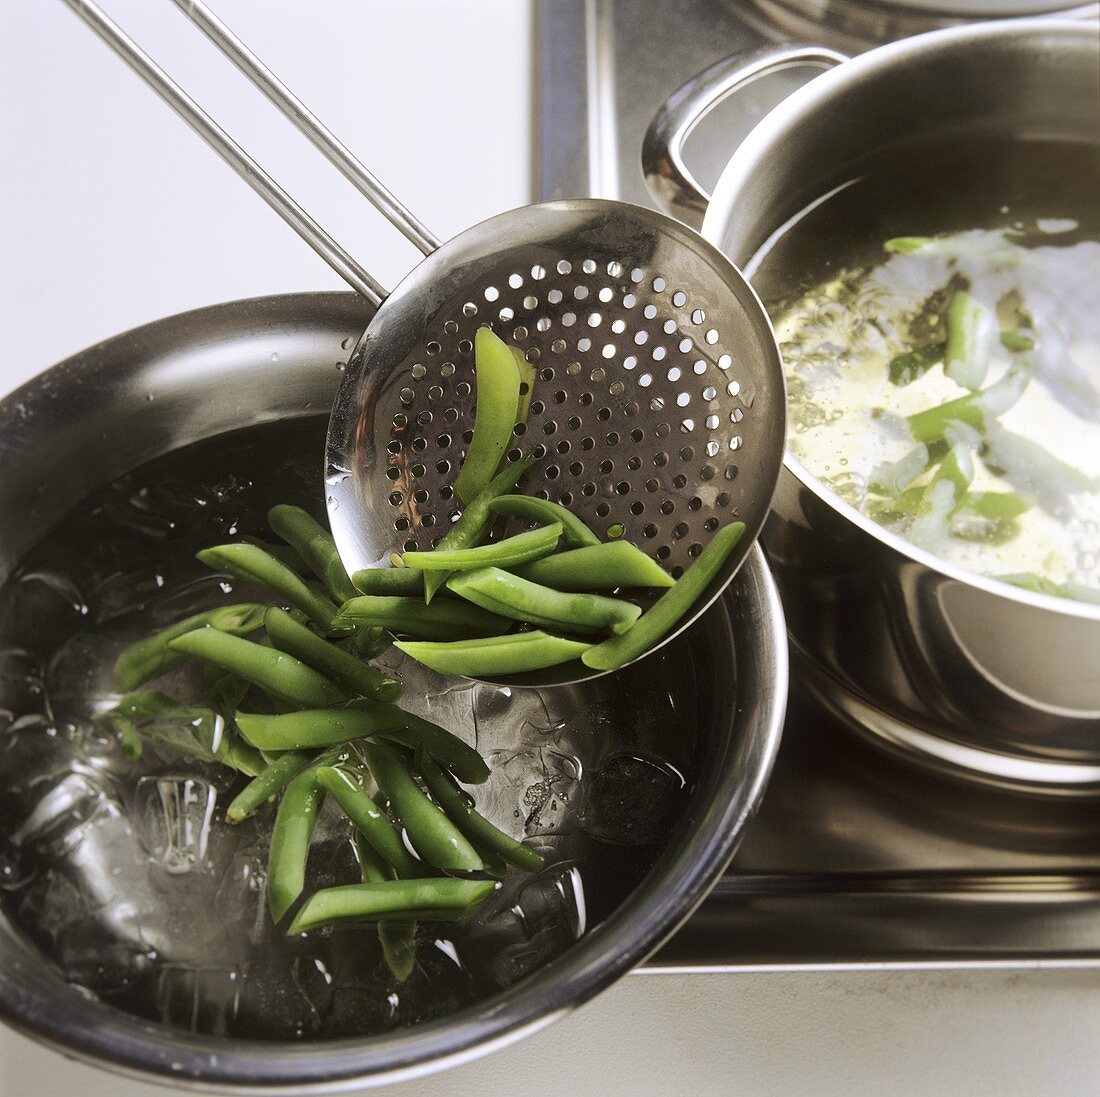 Blanching green beans (refreshing in iced water)